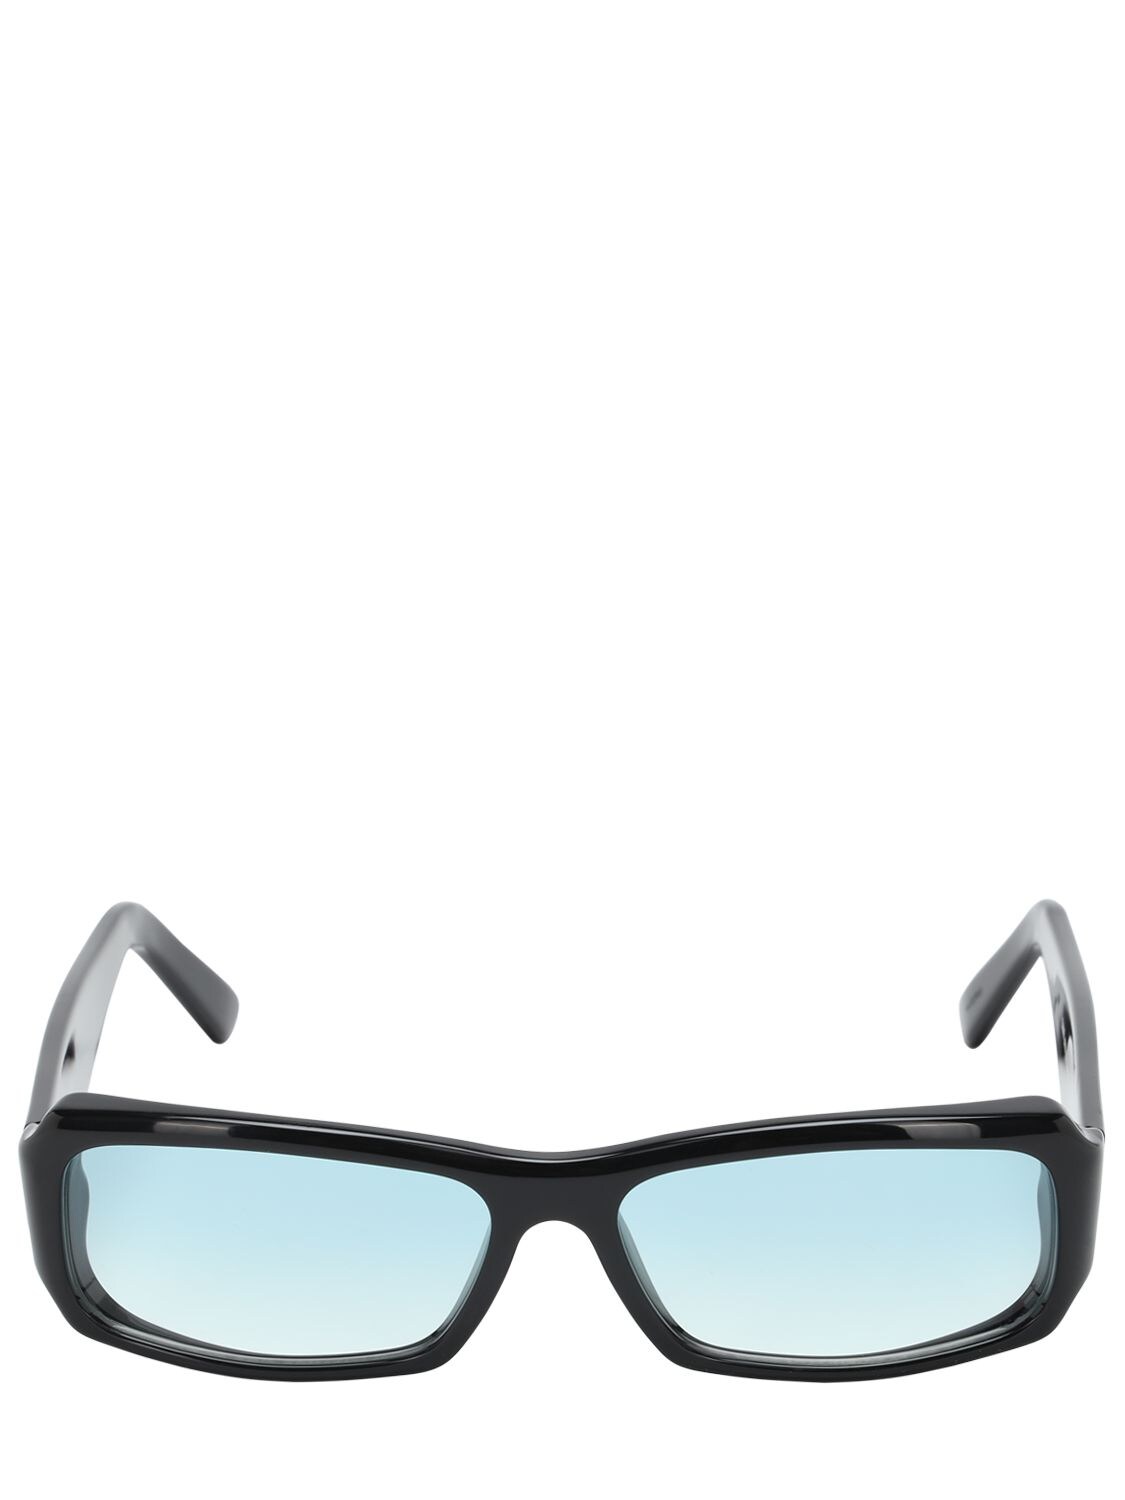 Andy Wolf Omar Squared Acetate Sunglasses In Black,blue